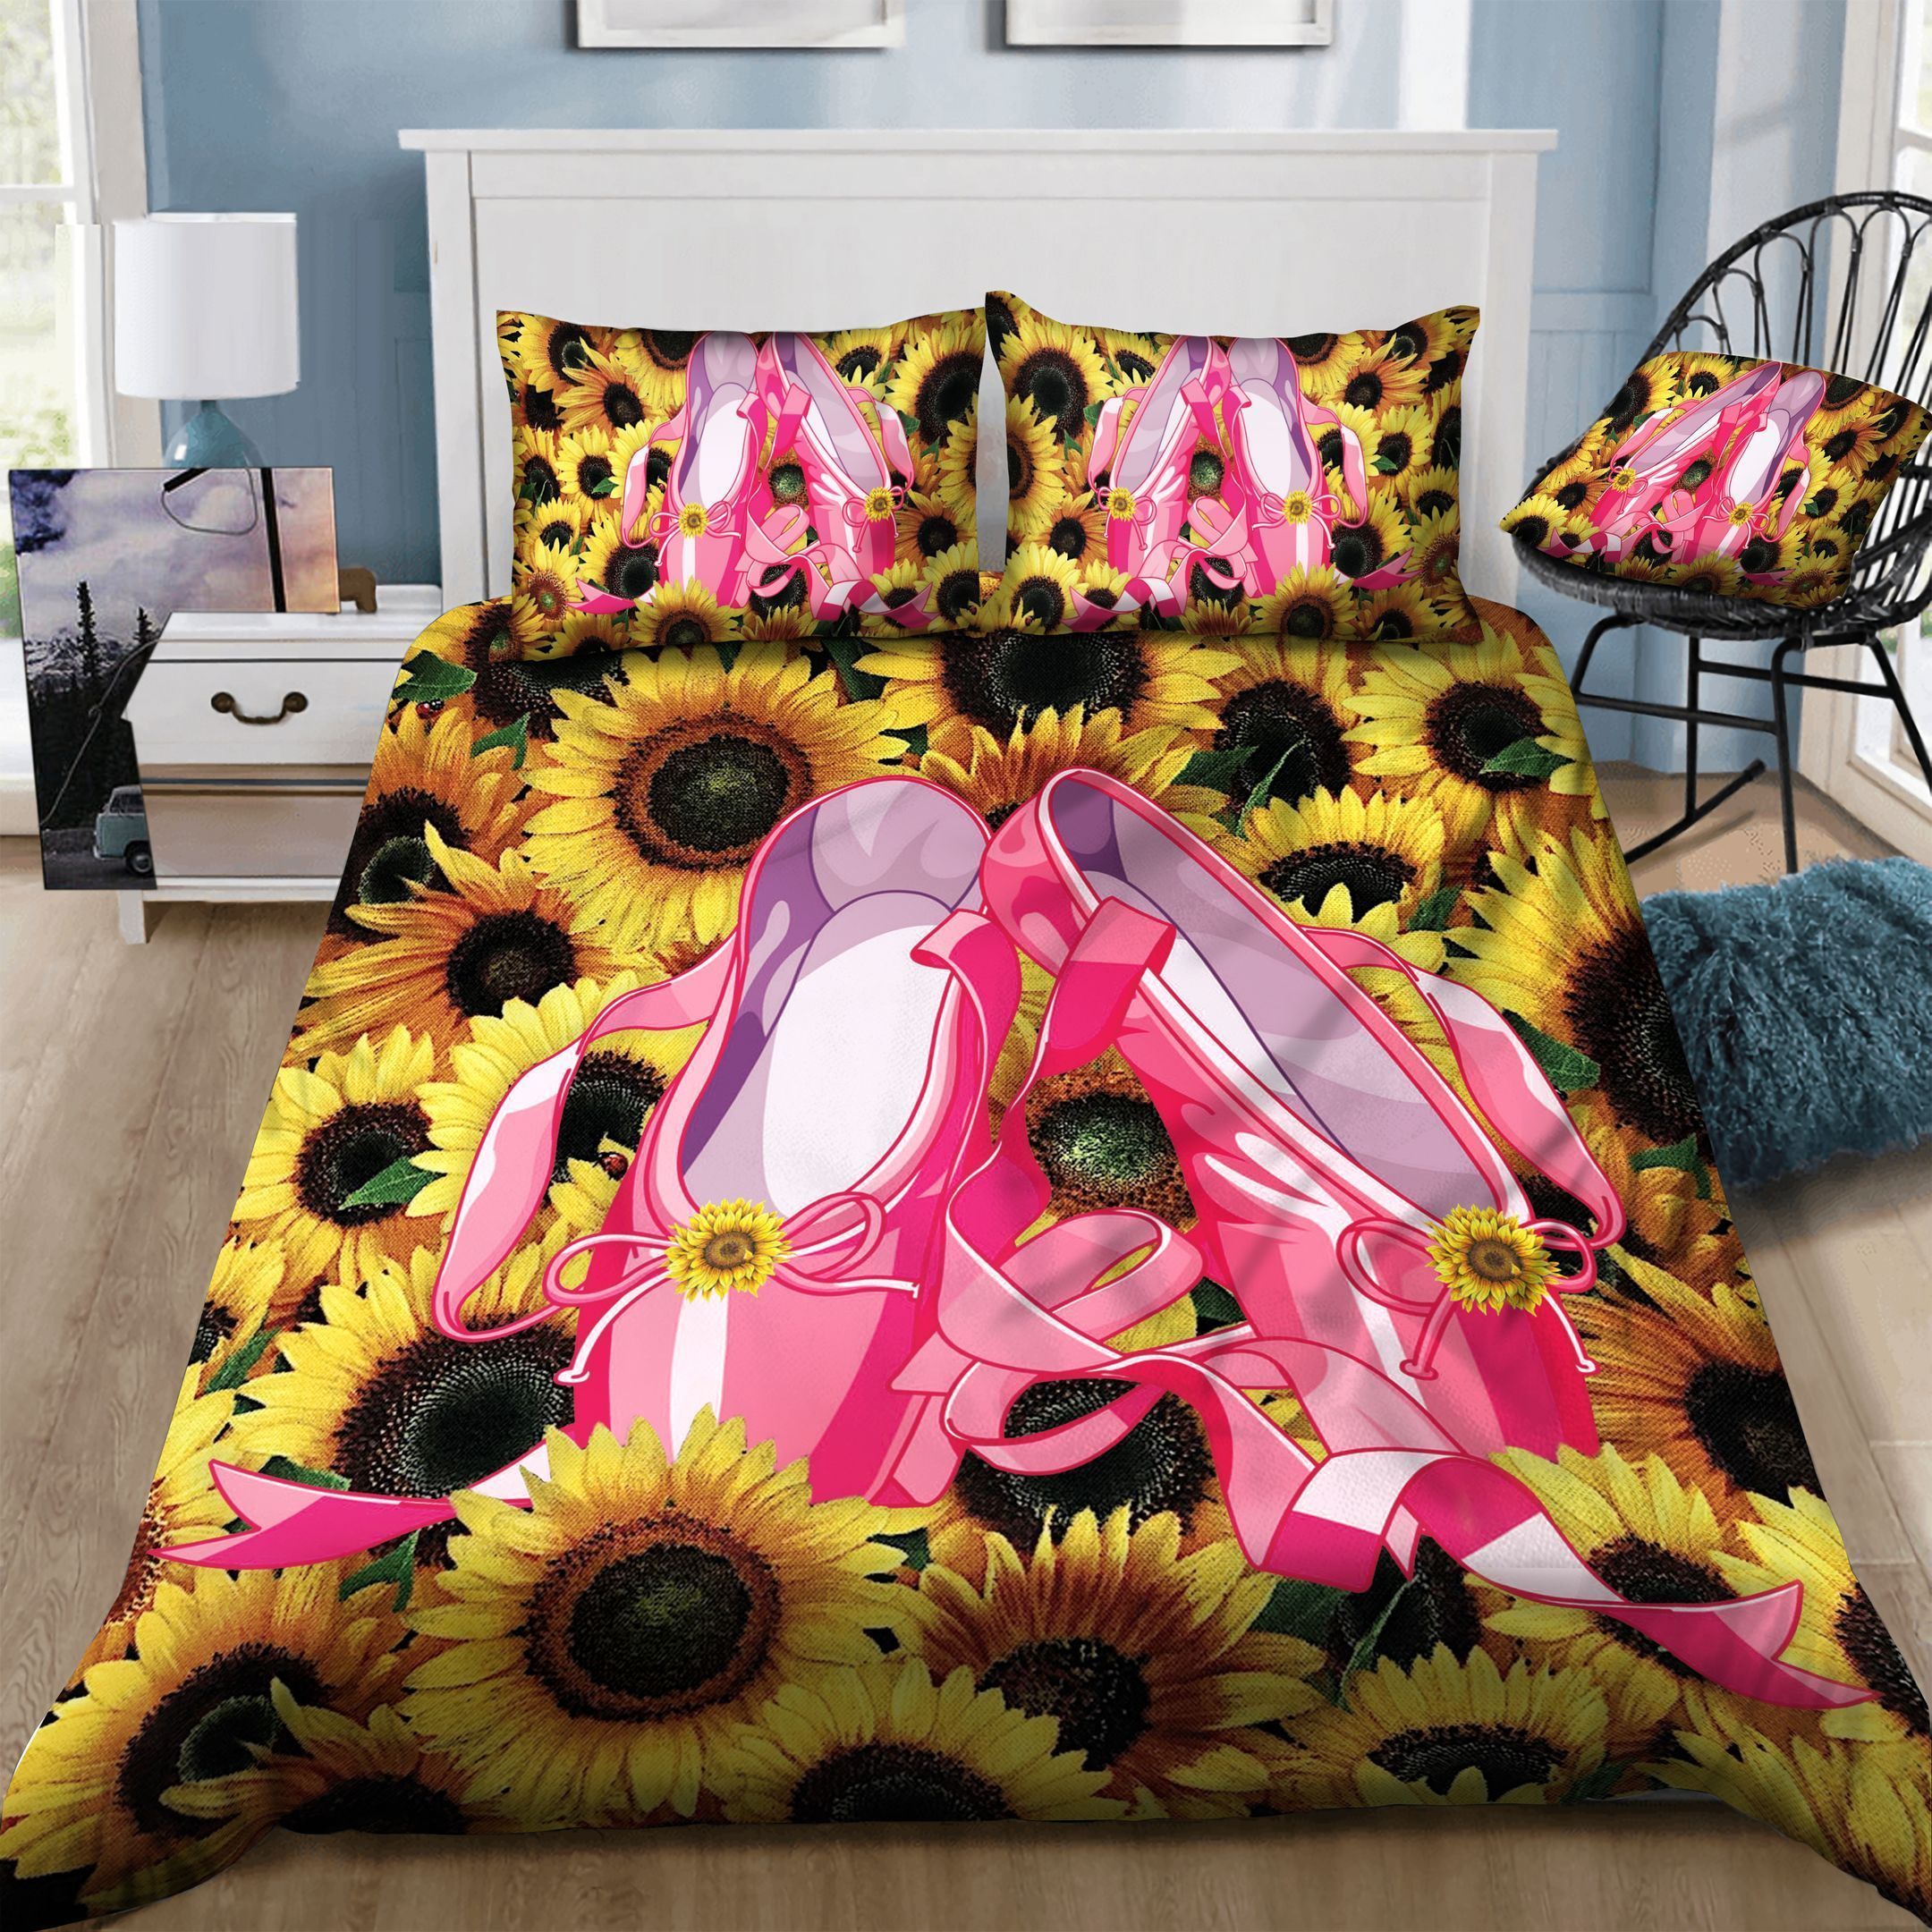 3D Ballet Shoes And Sunflowers Bedding Sets